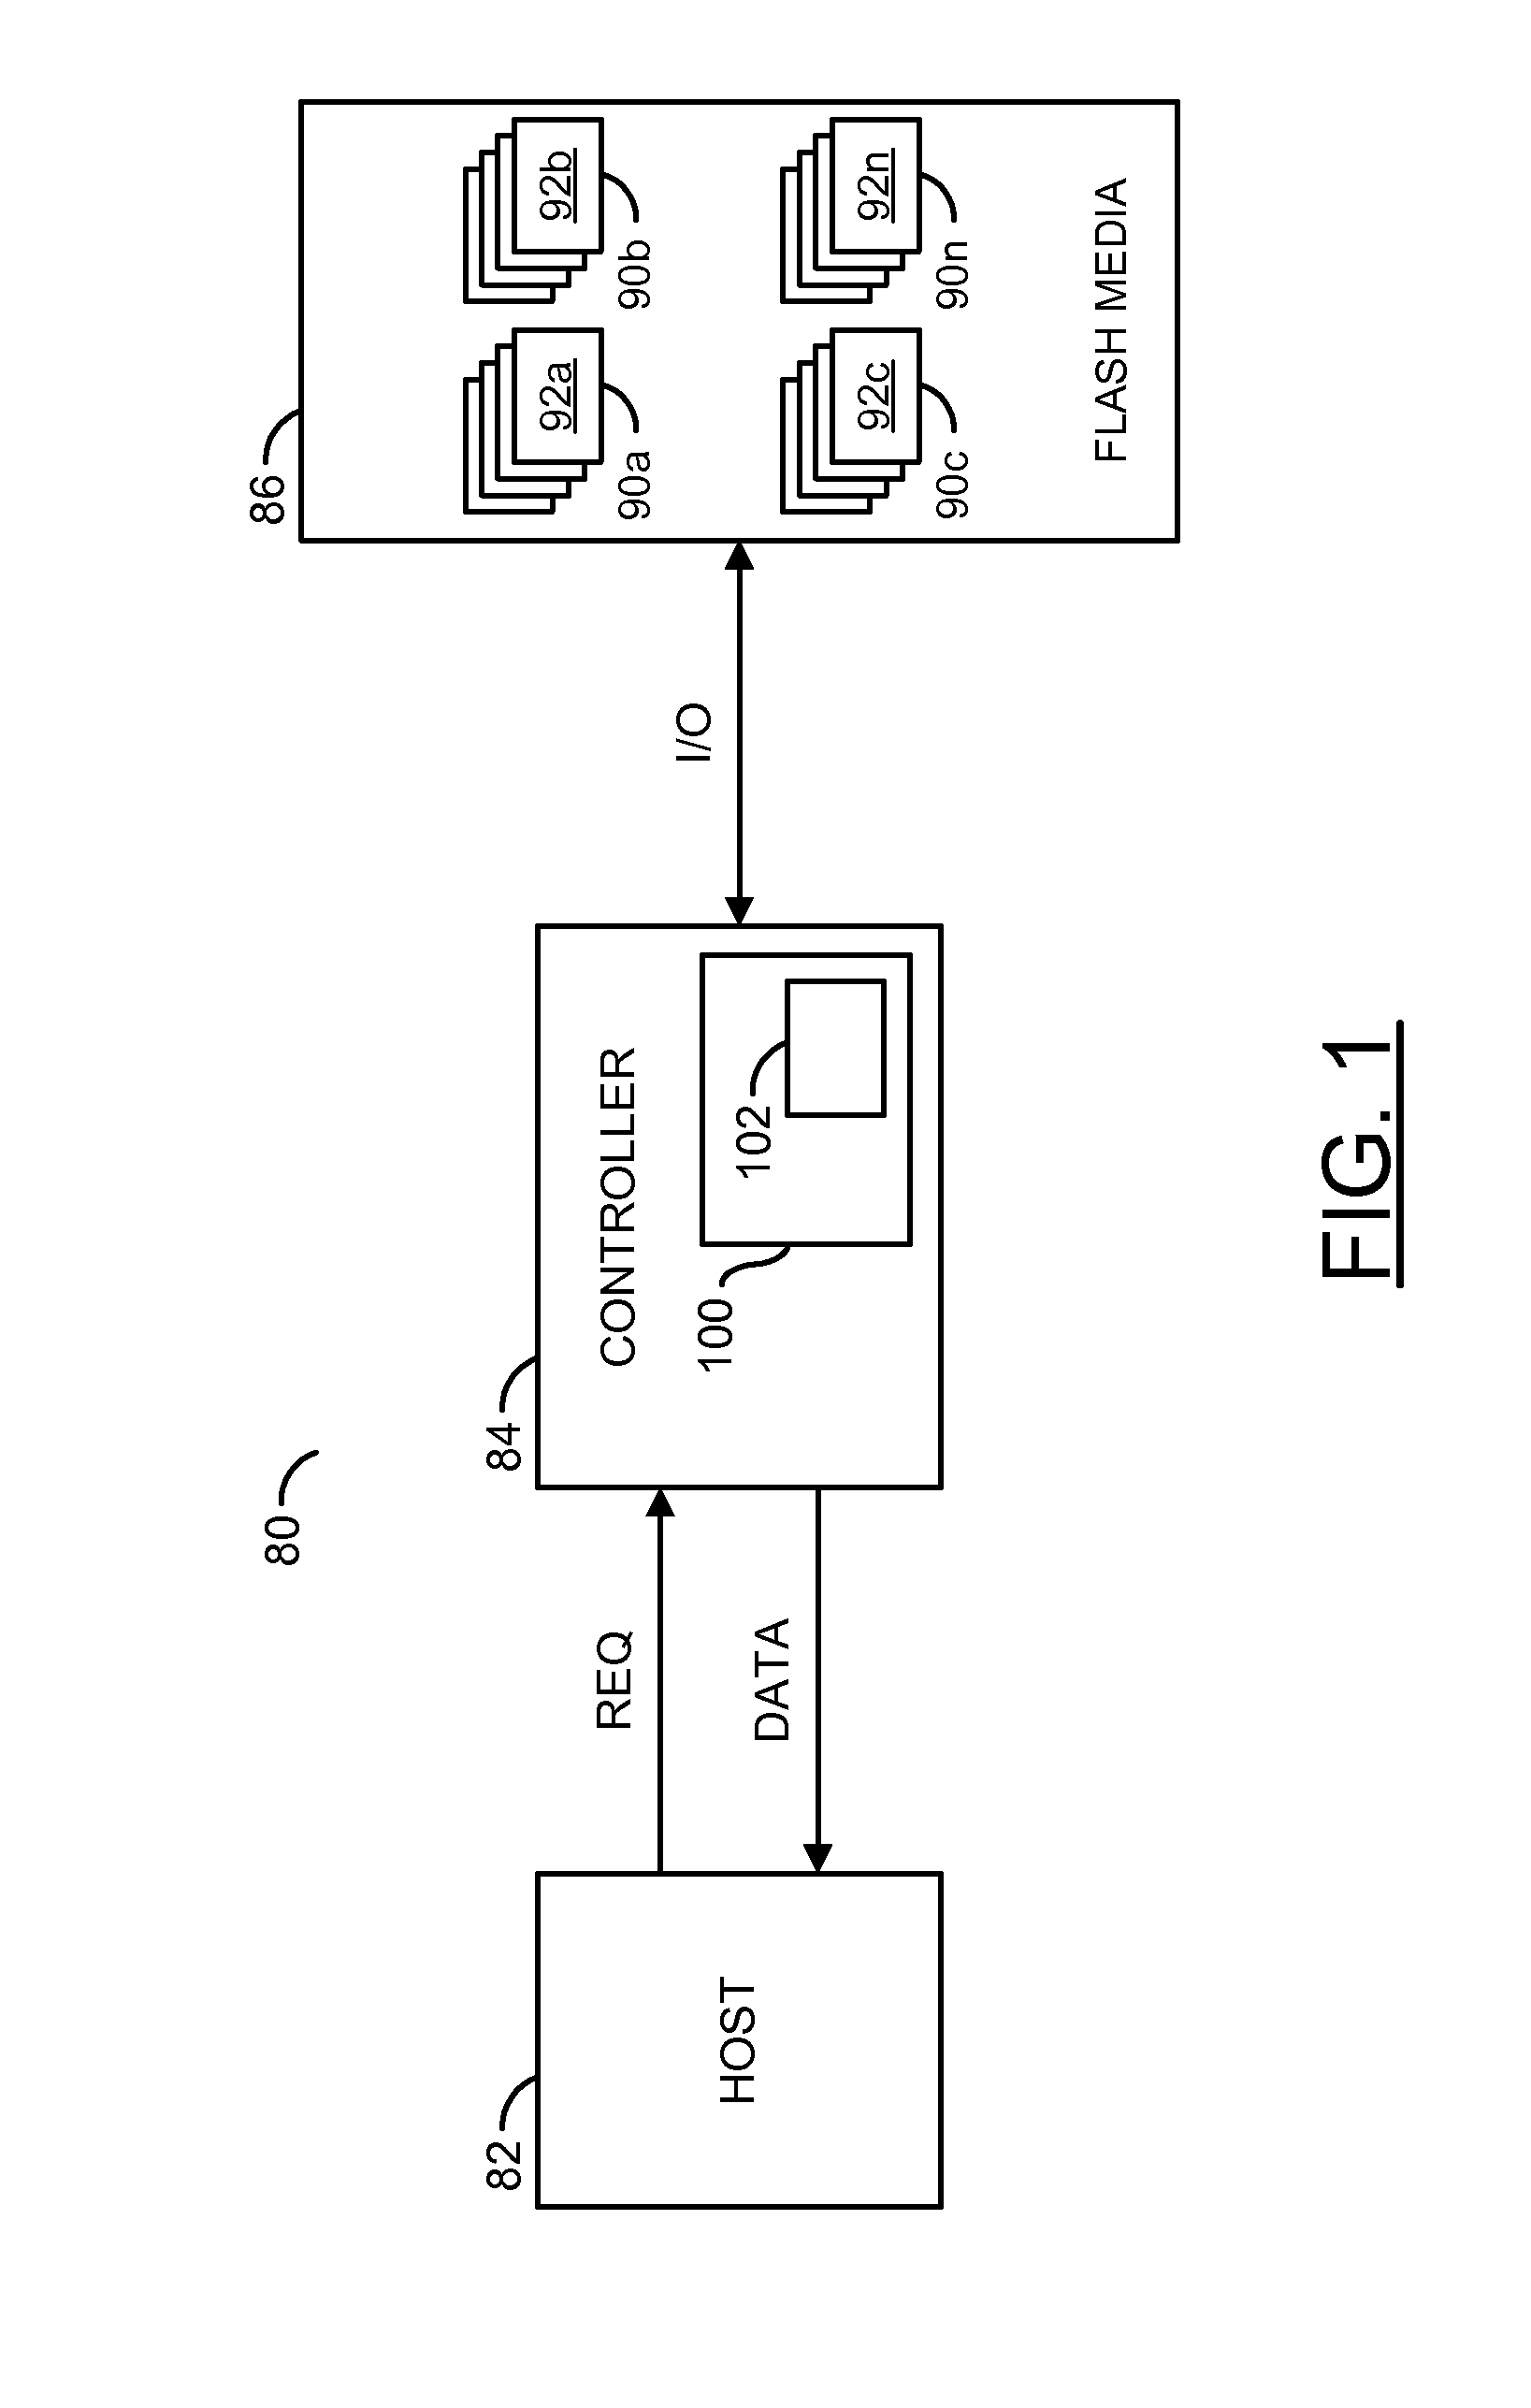 Physical-to-logical address map to speed up a recycle operation in a solid state drive